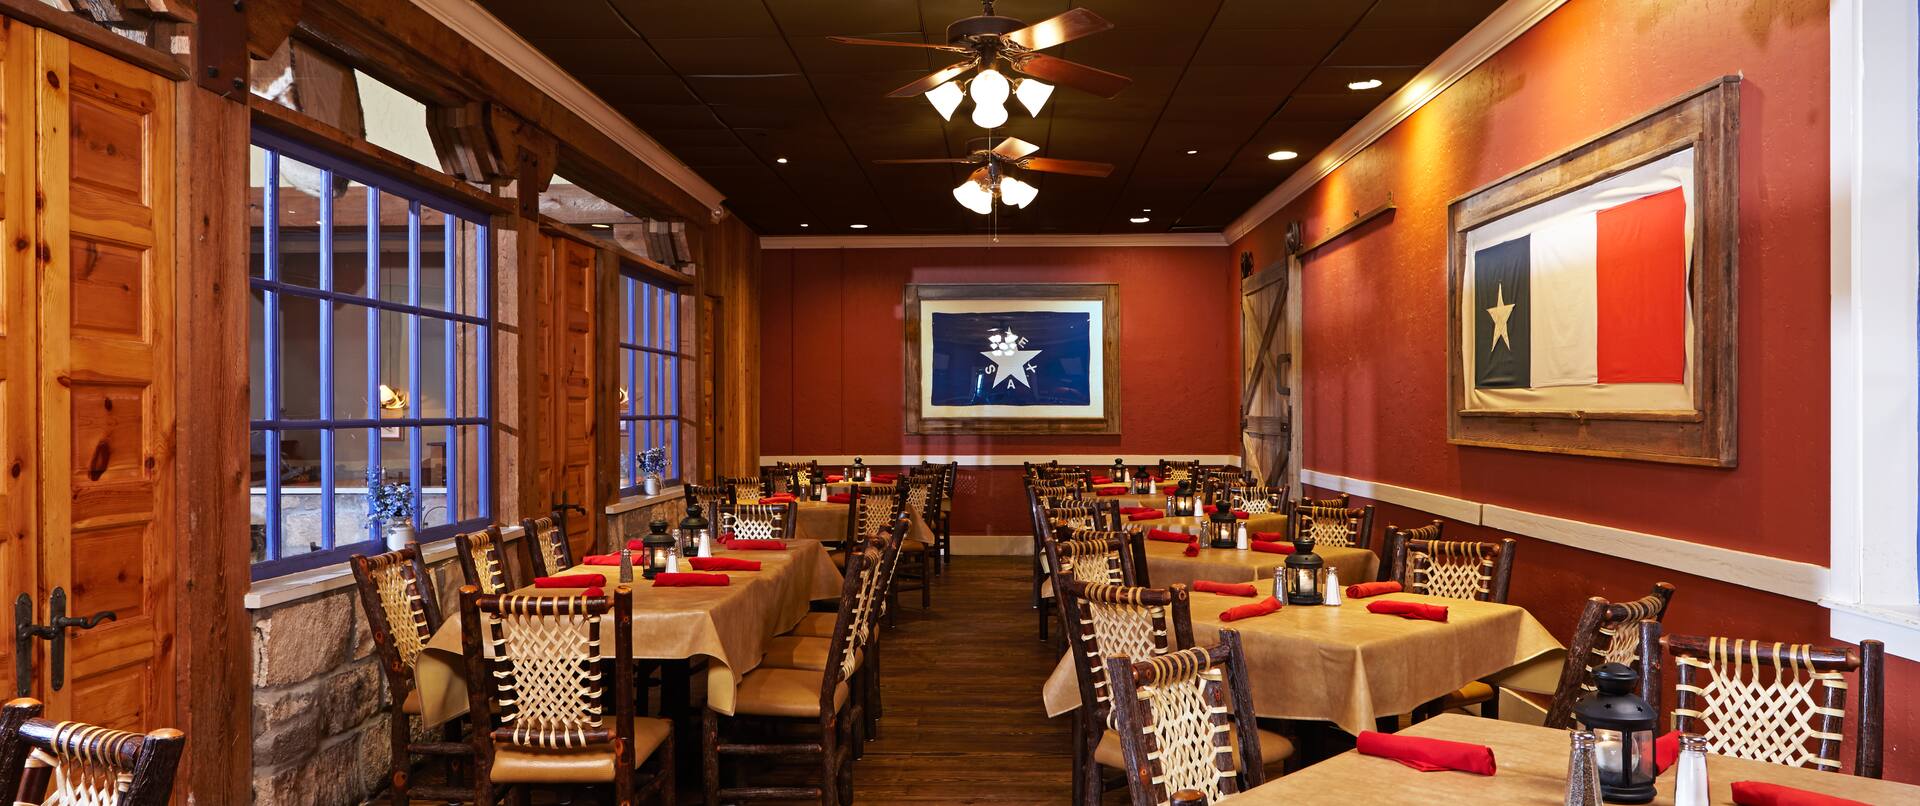 Rio Ranch Restaurant, Private Dining Room